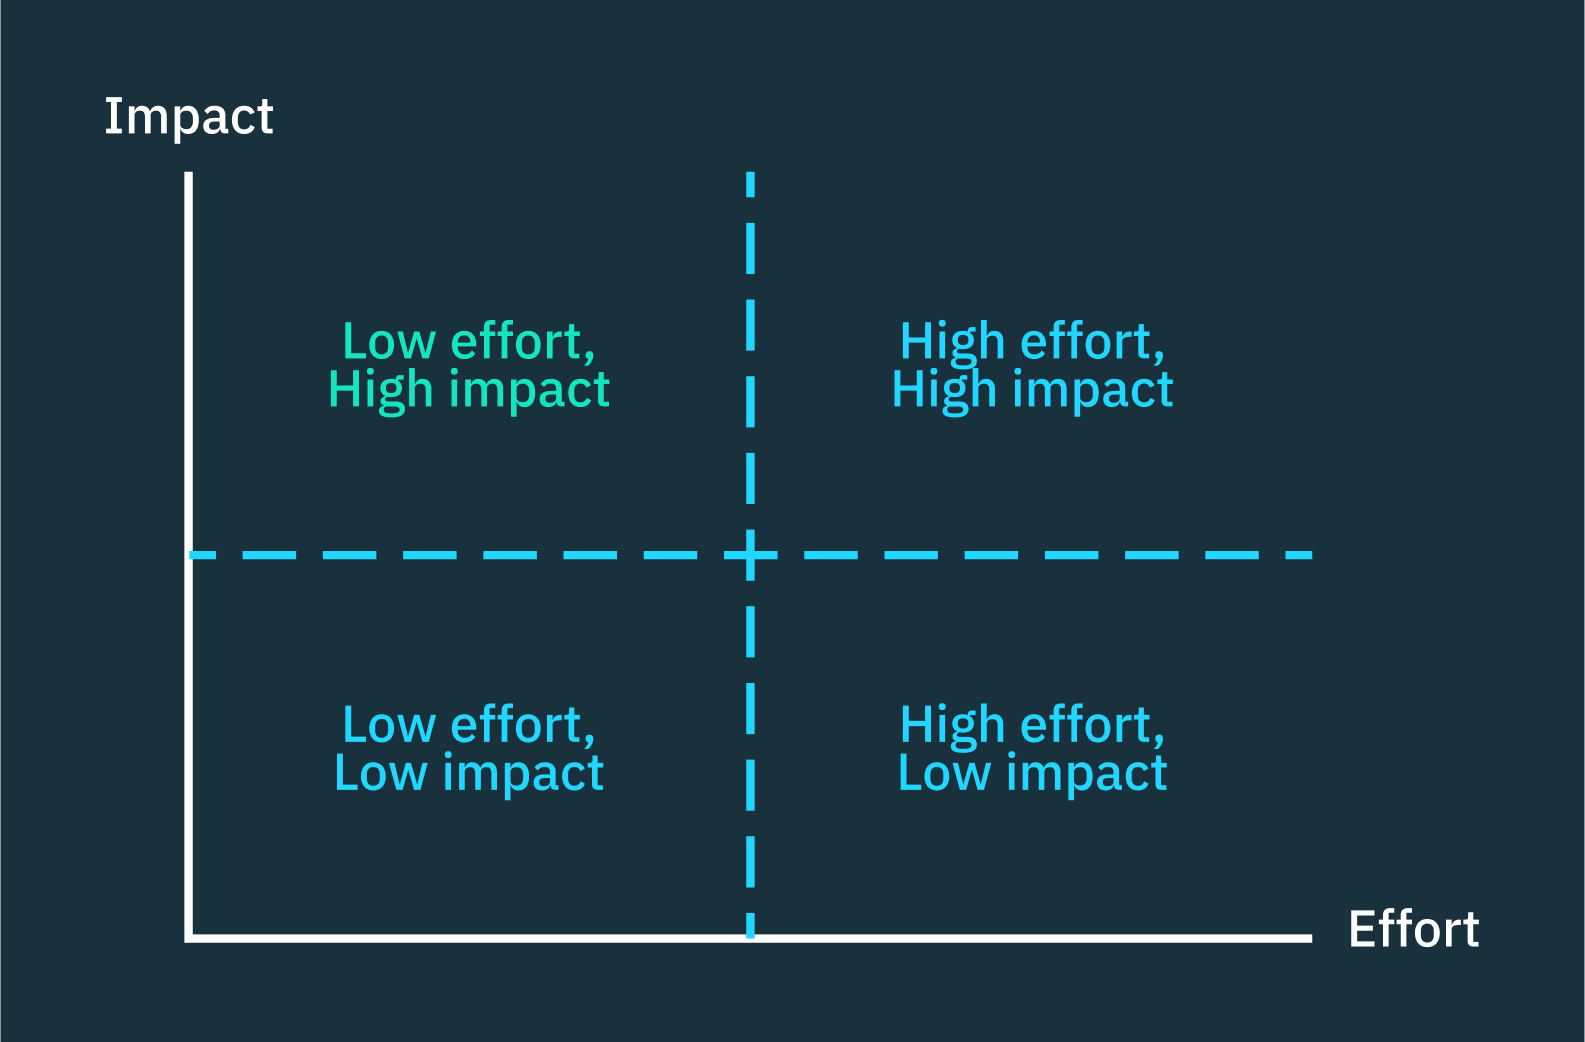 A 2x2 diagram where the x-axis is "Impact" and the y-axis is "Effort." The quadrants are labeled, starting from the upper left and moving clockwise: 1. "Low-effort, high impact" 2. "High-effort, high-impact" 3. "High-effort, low-impact" 4. "Low-effort, low-impact"